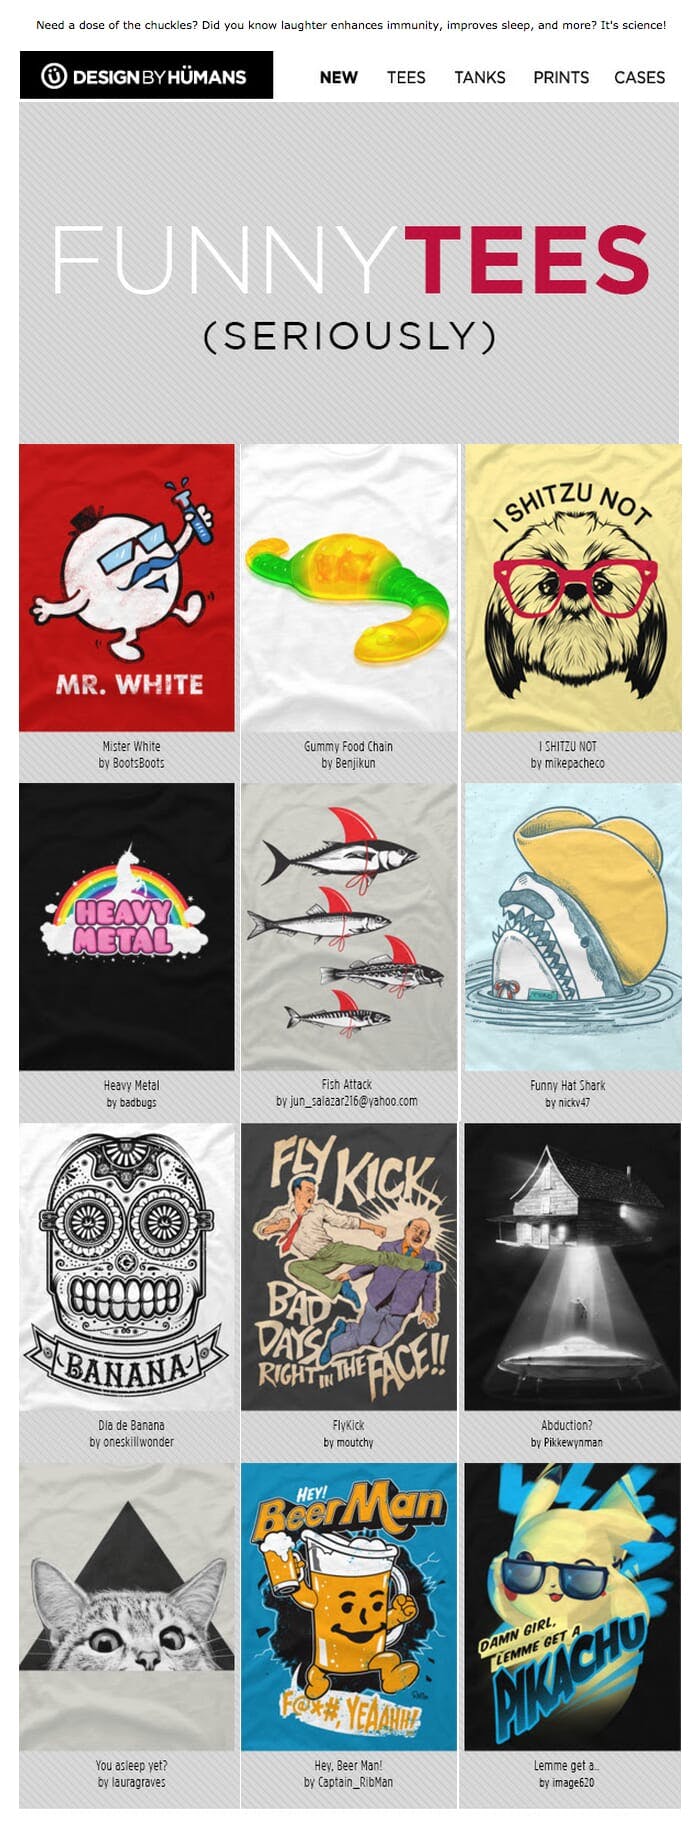 Eblast from Design By Humans featuring my Funny Hat Shark Design